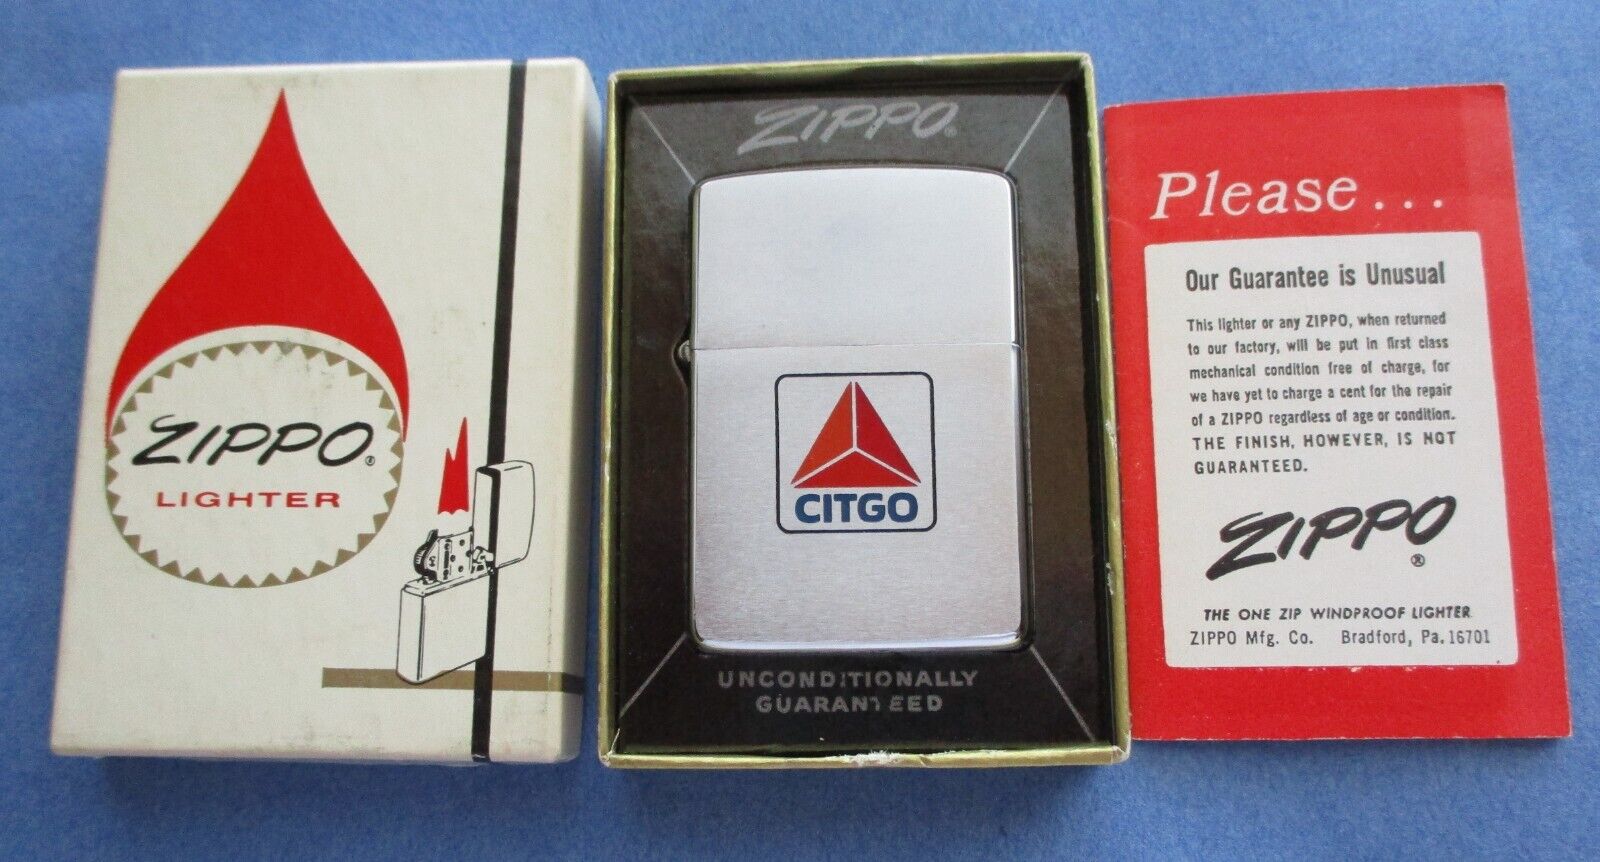 Vintage Zippo 1967 Lighter - CITGO - Mint-In-Box with Guarantee Paper